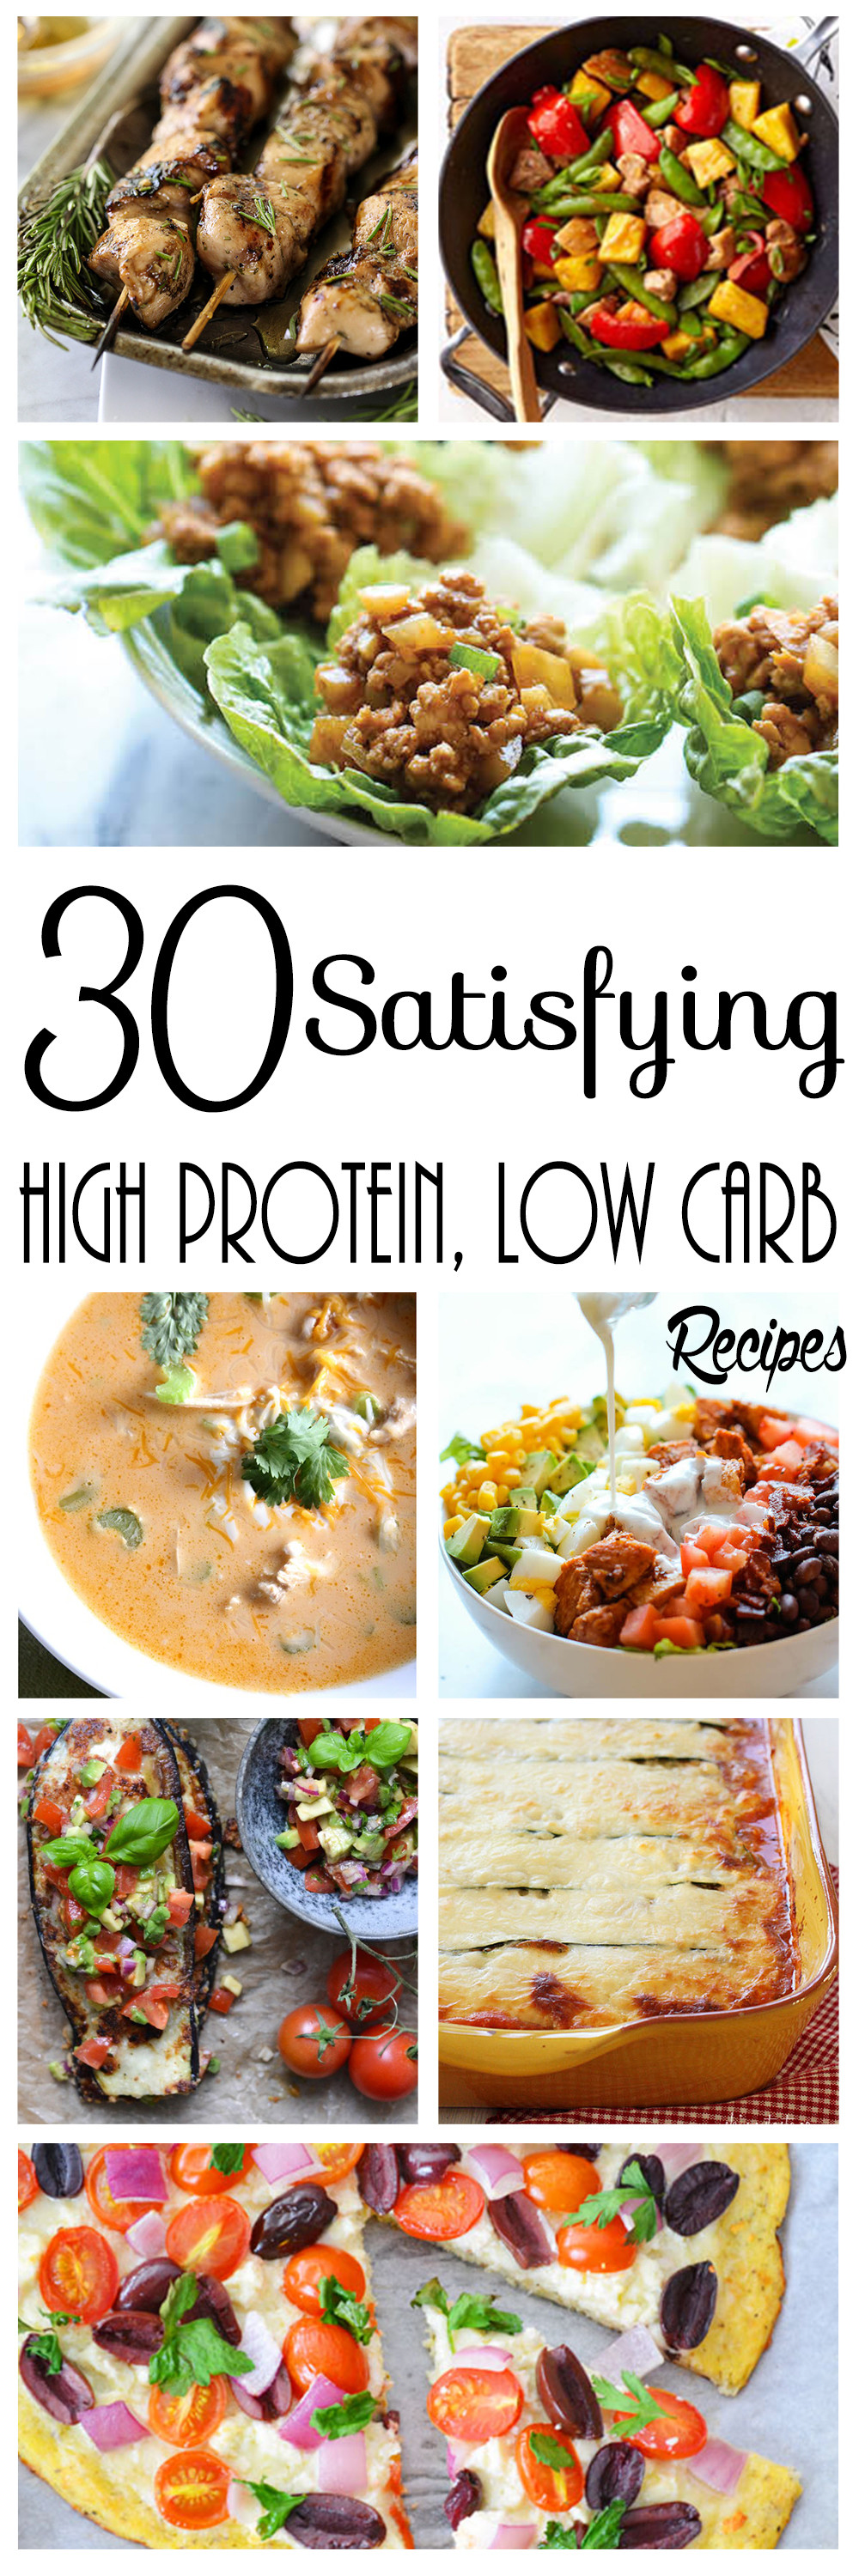 High Protein Low Carb Dinner Recipes
 30 Satisfying High Protein Low Carb Recipes FULL